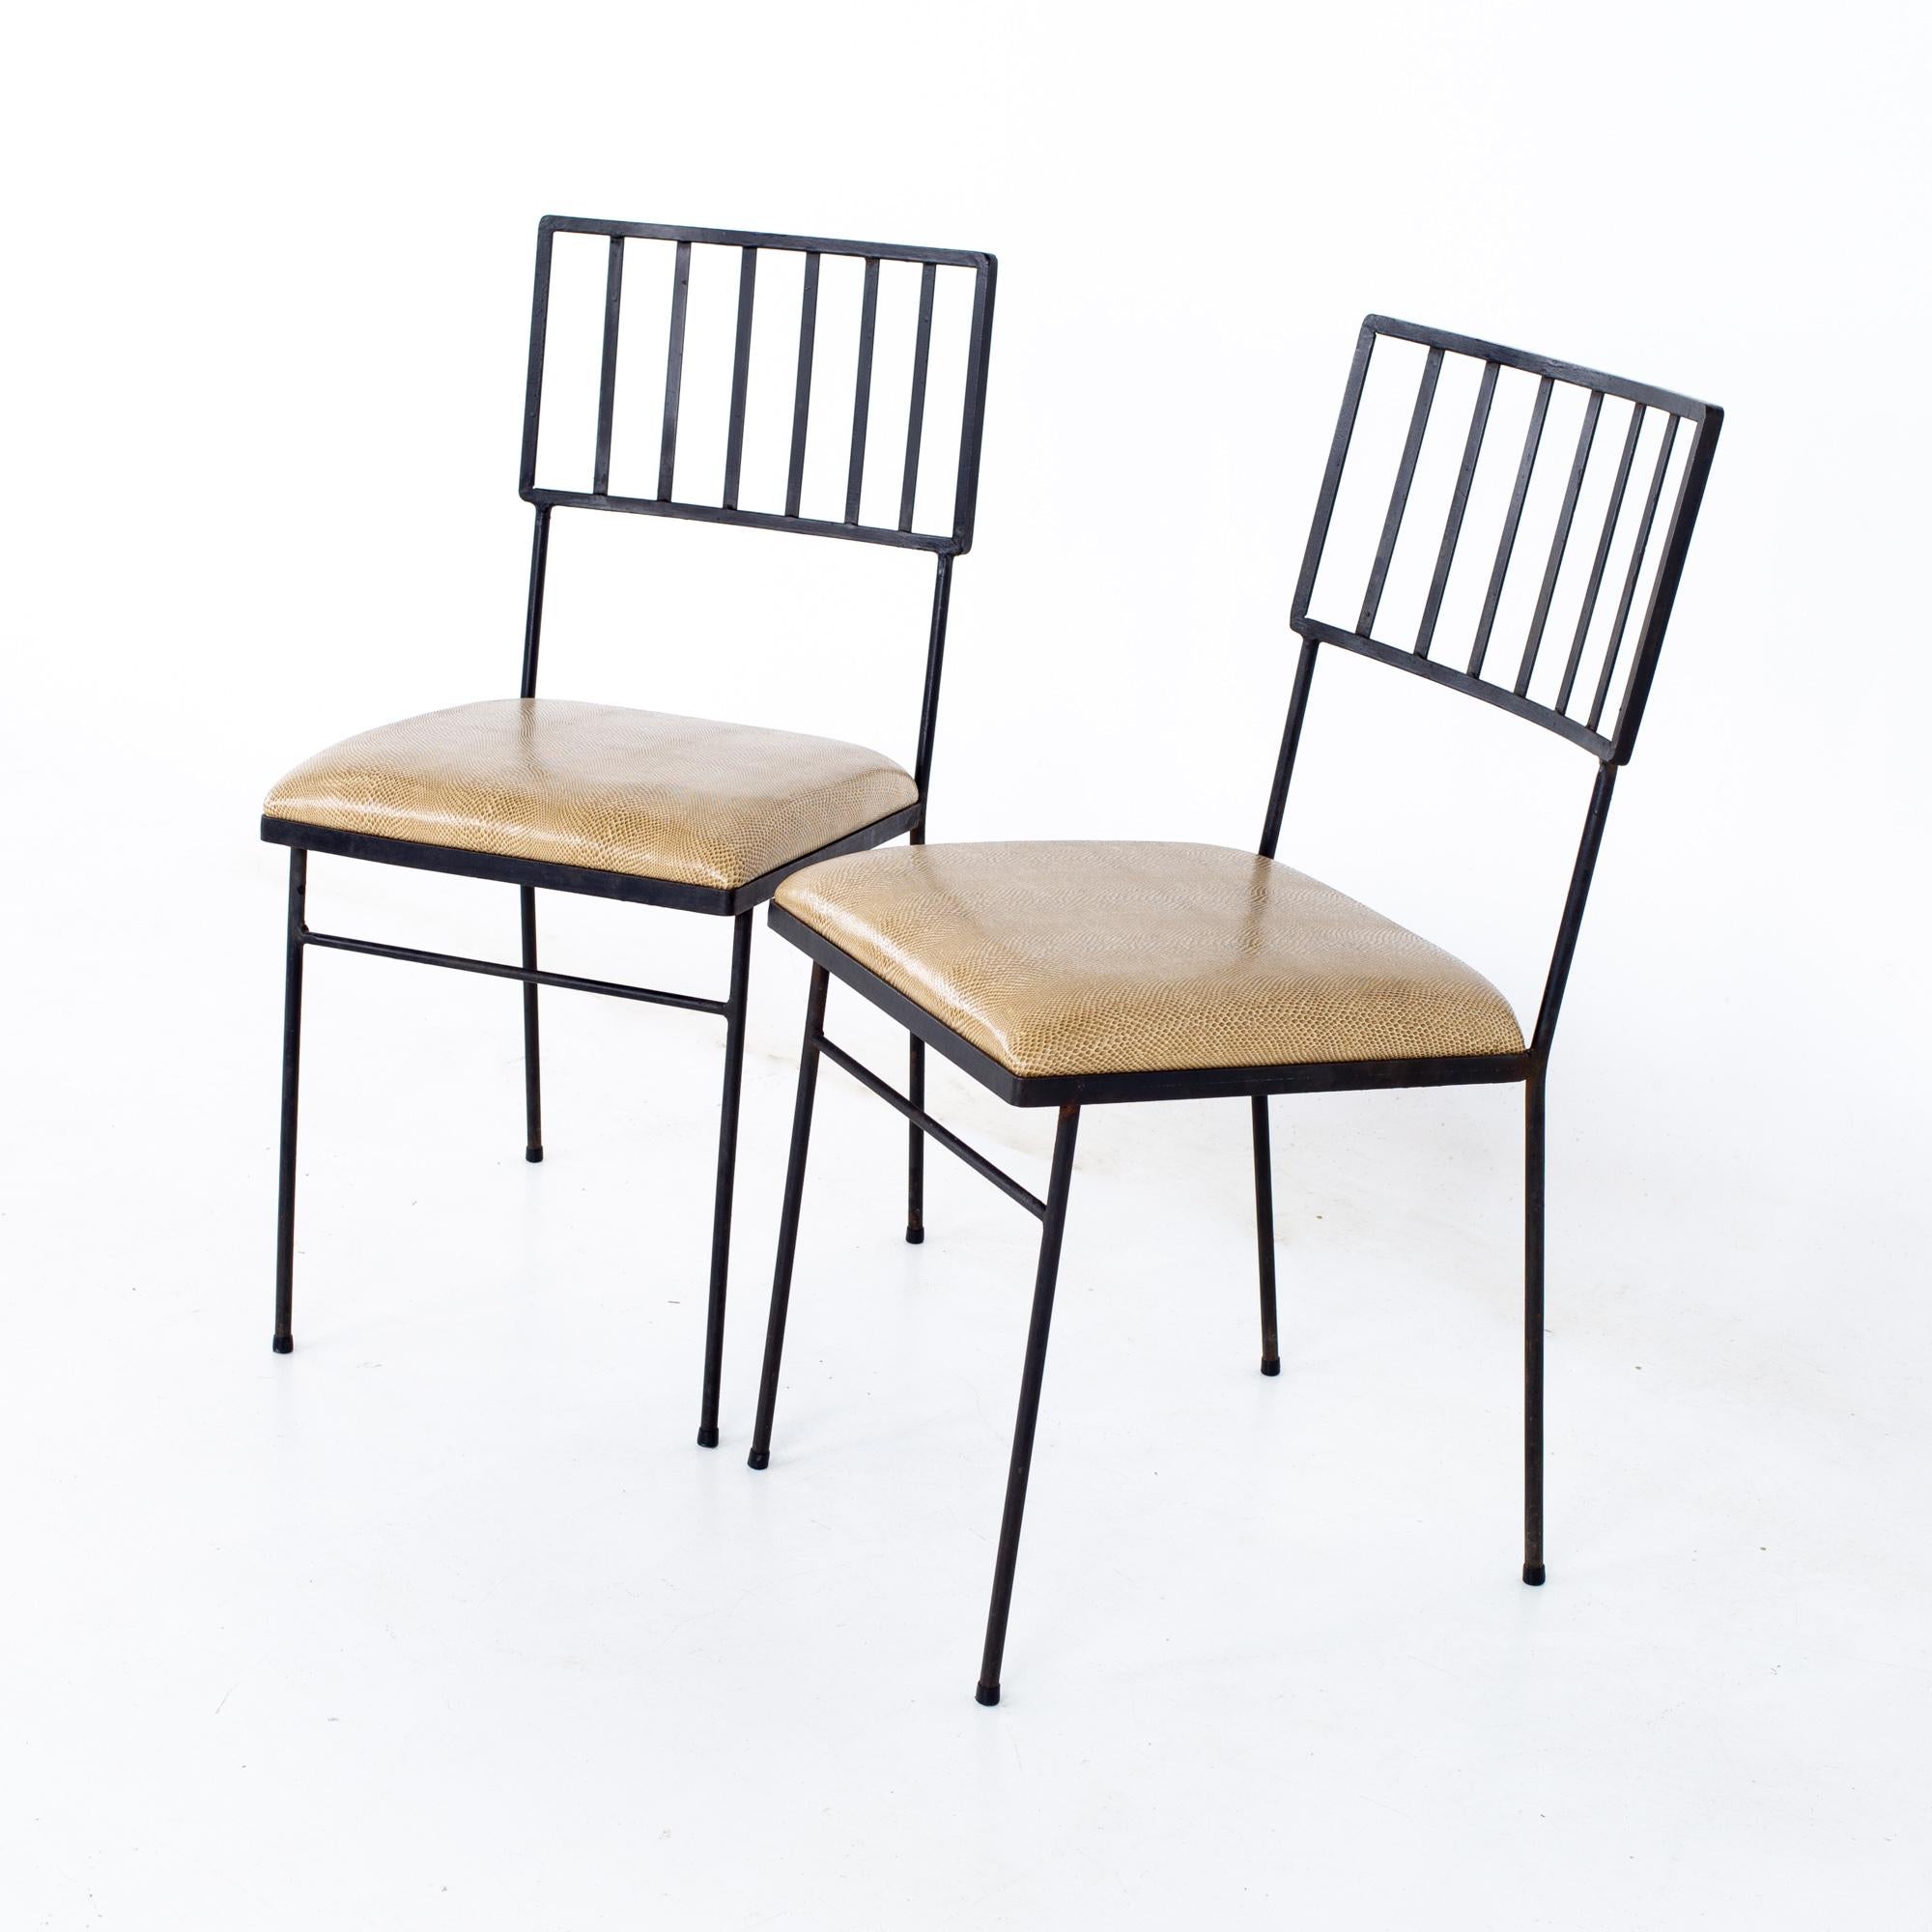 Late 20th Century Milo Baughman For Pacific Iron Works Mid Century Chairs - Set of 4